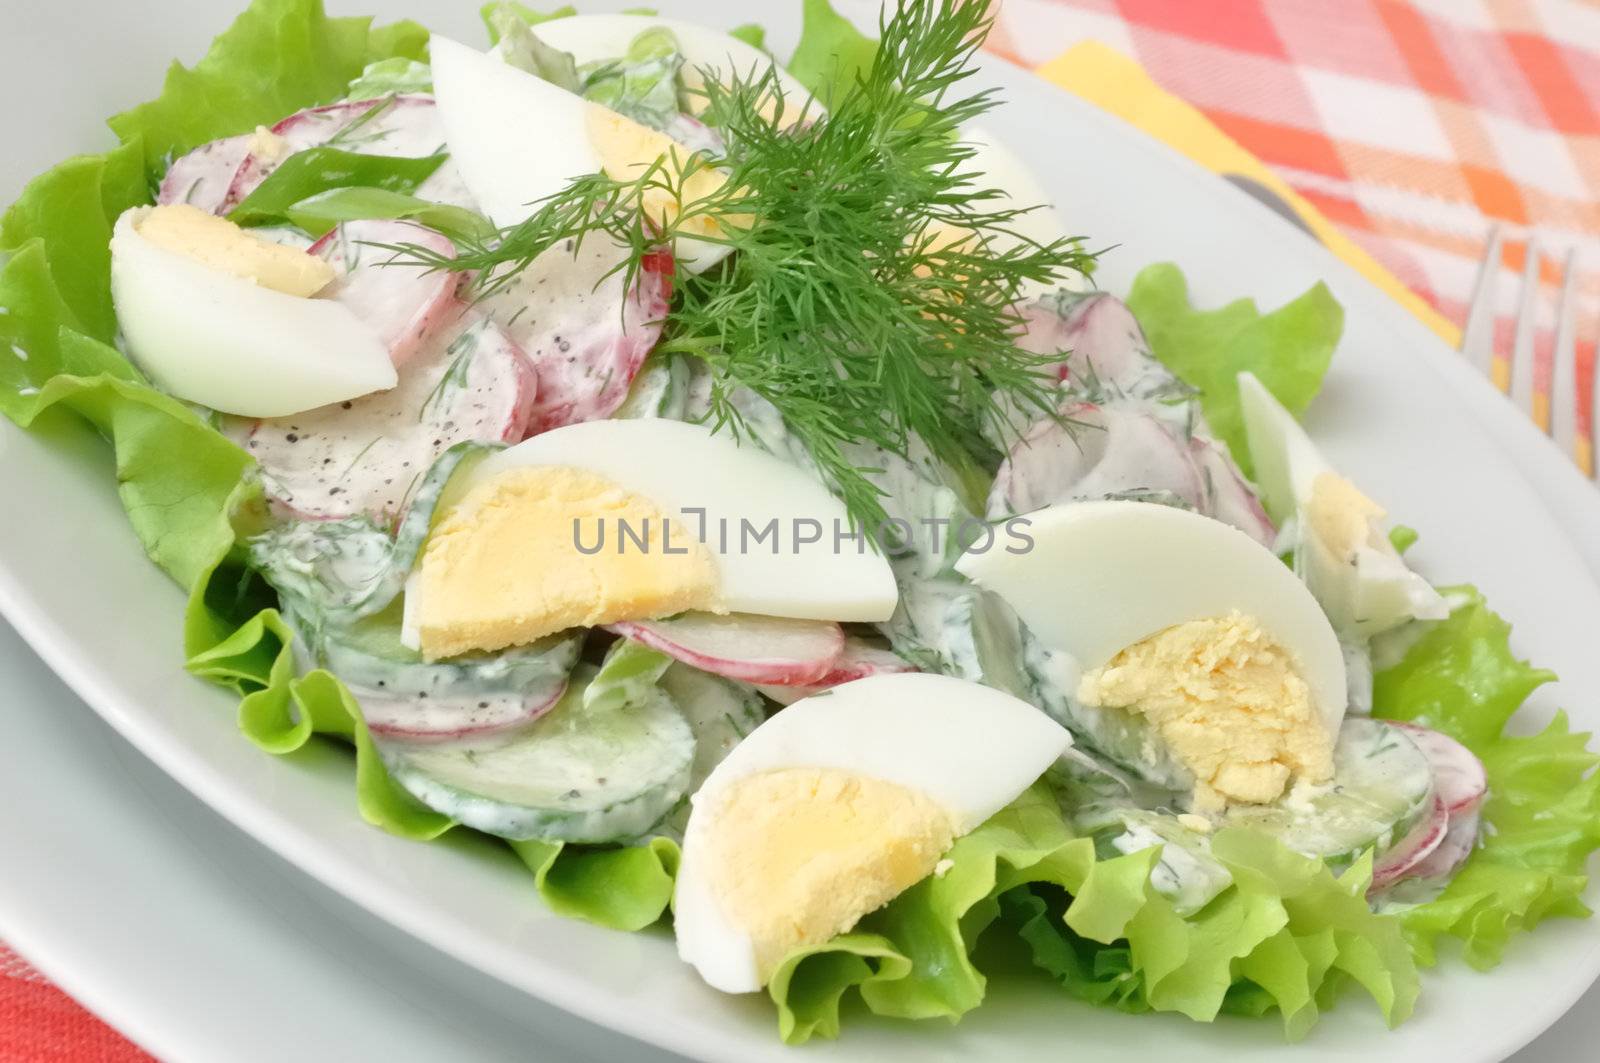 Salad radishes and cucumbers in sour cream sauce with egg